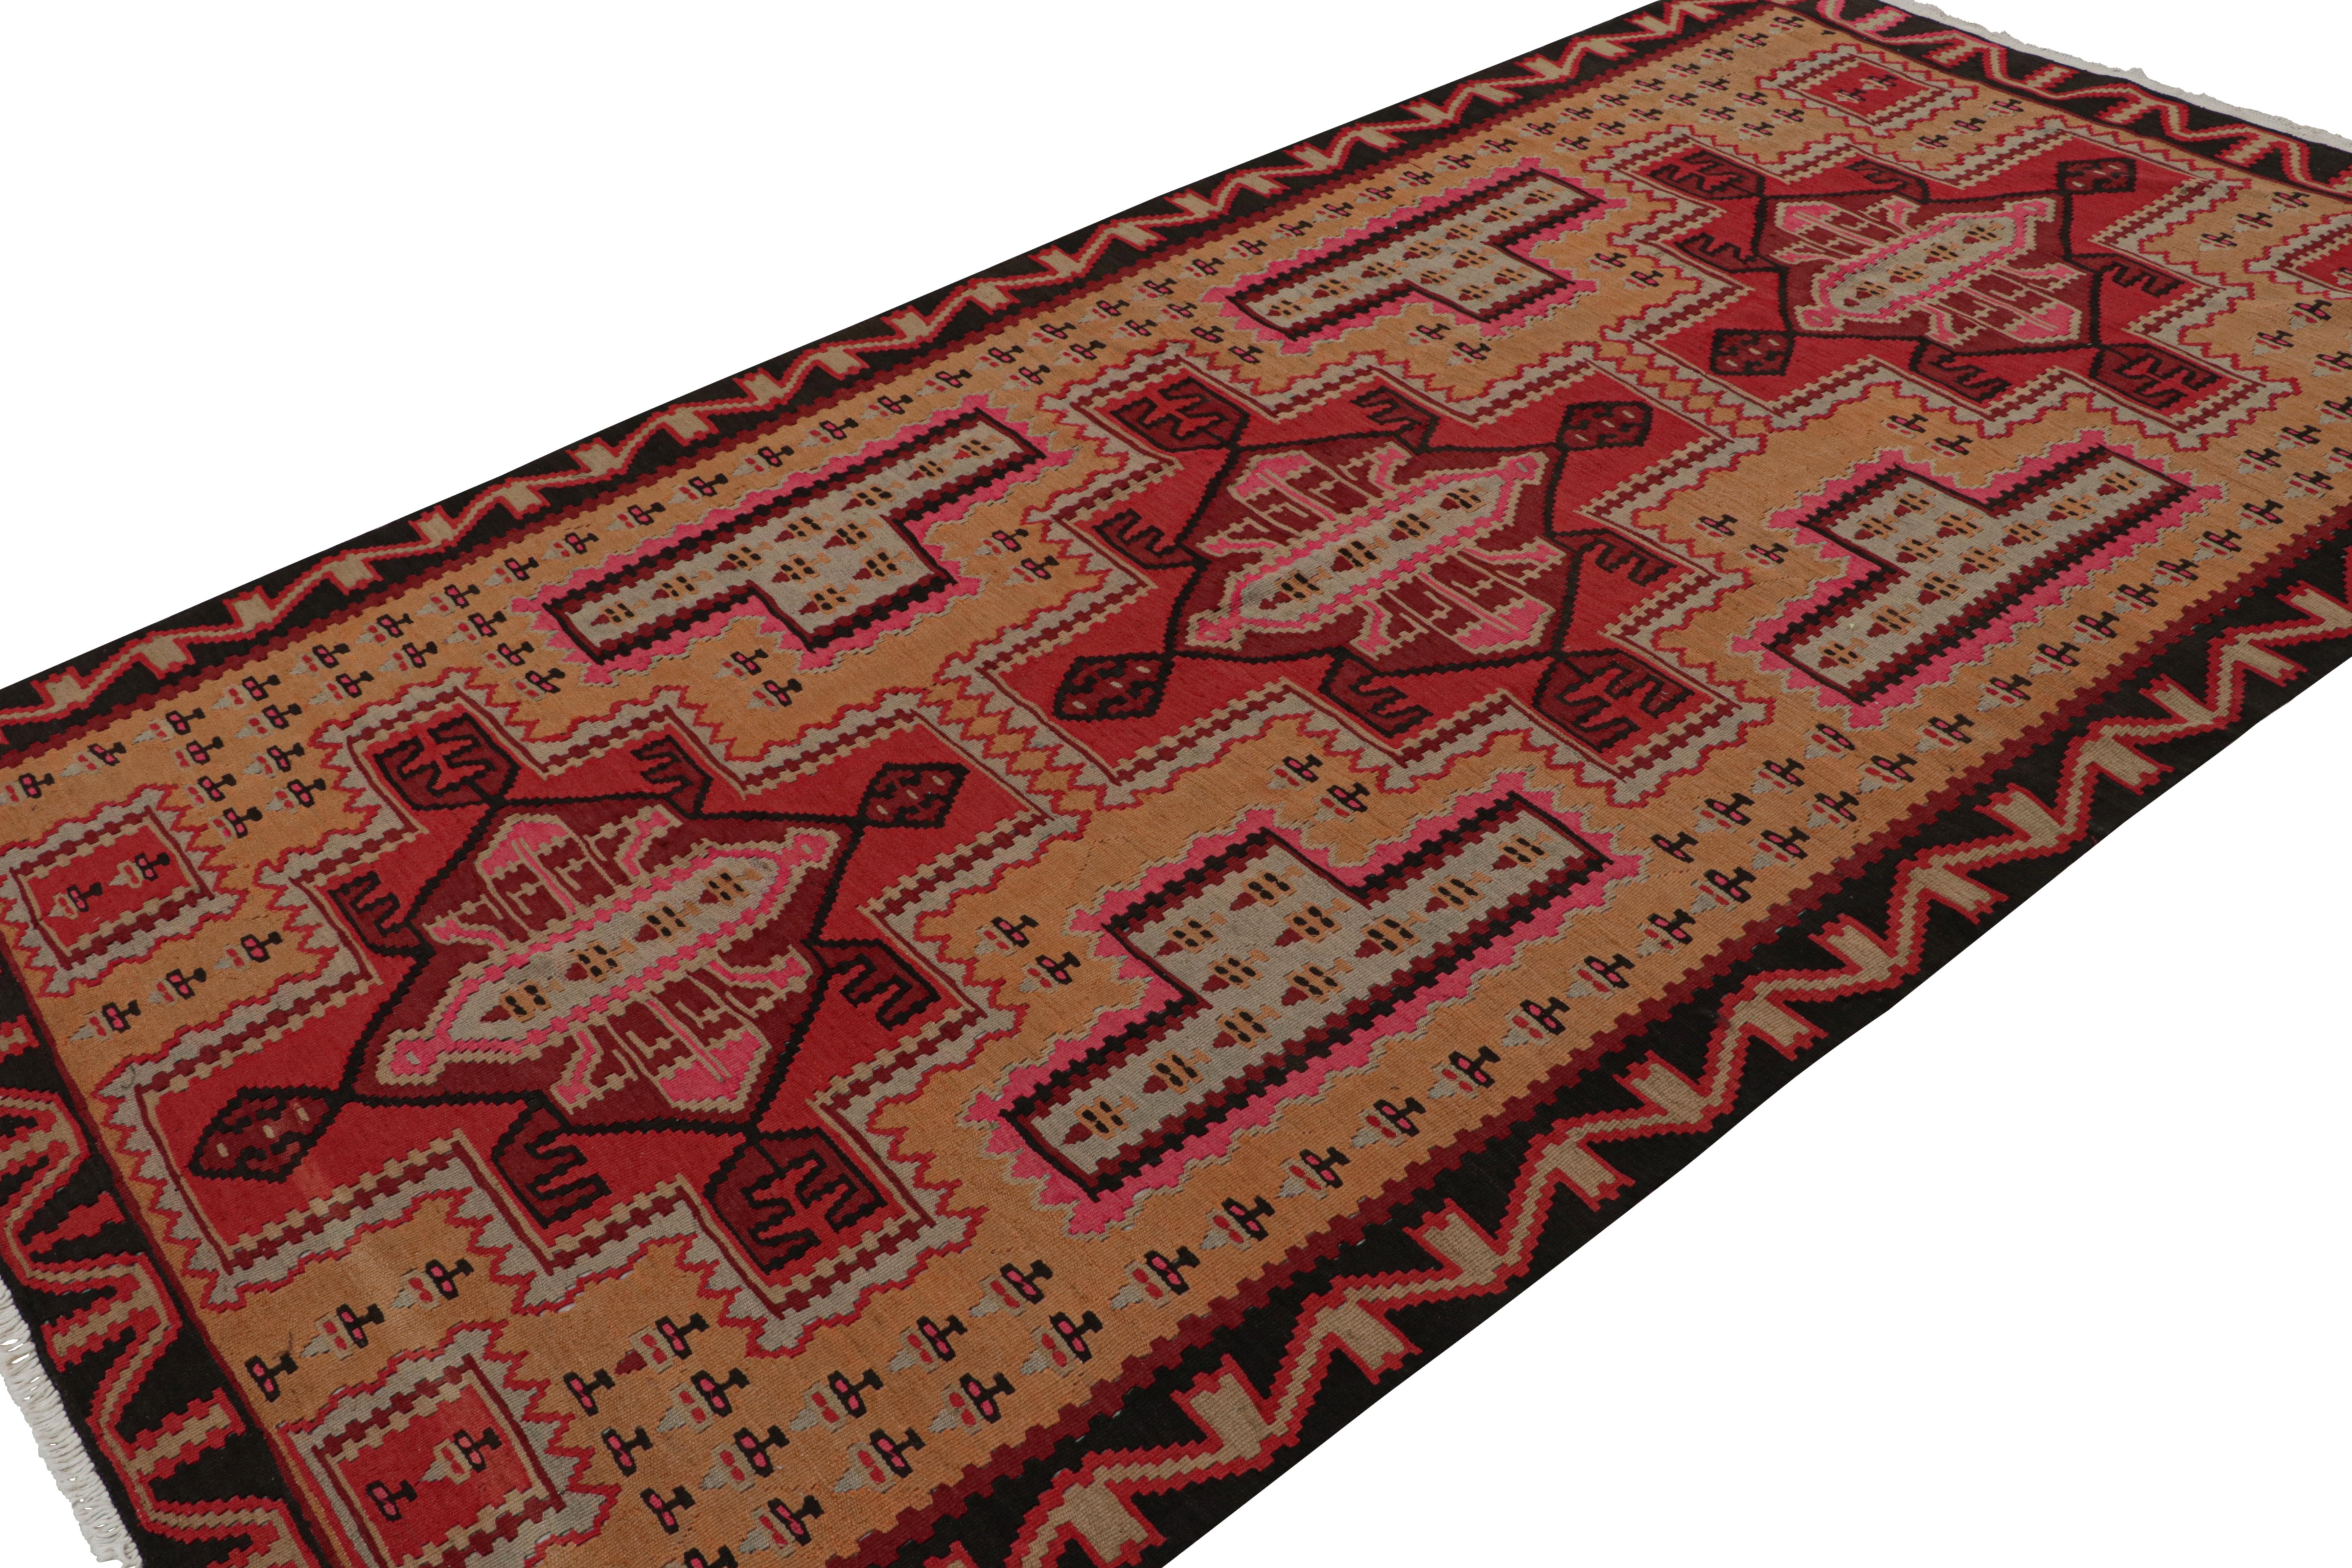 This vintage 5x10 Persian Kilim is the latest to join our Kilim & Flatweave collection. 

On the Design:

Handwoven in wool circa 1950-1960, the piece carries red medallions on a gold field. The medallions are further cocooned with all over